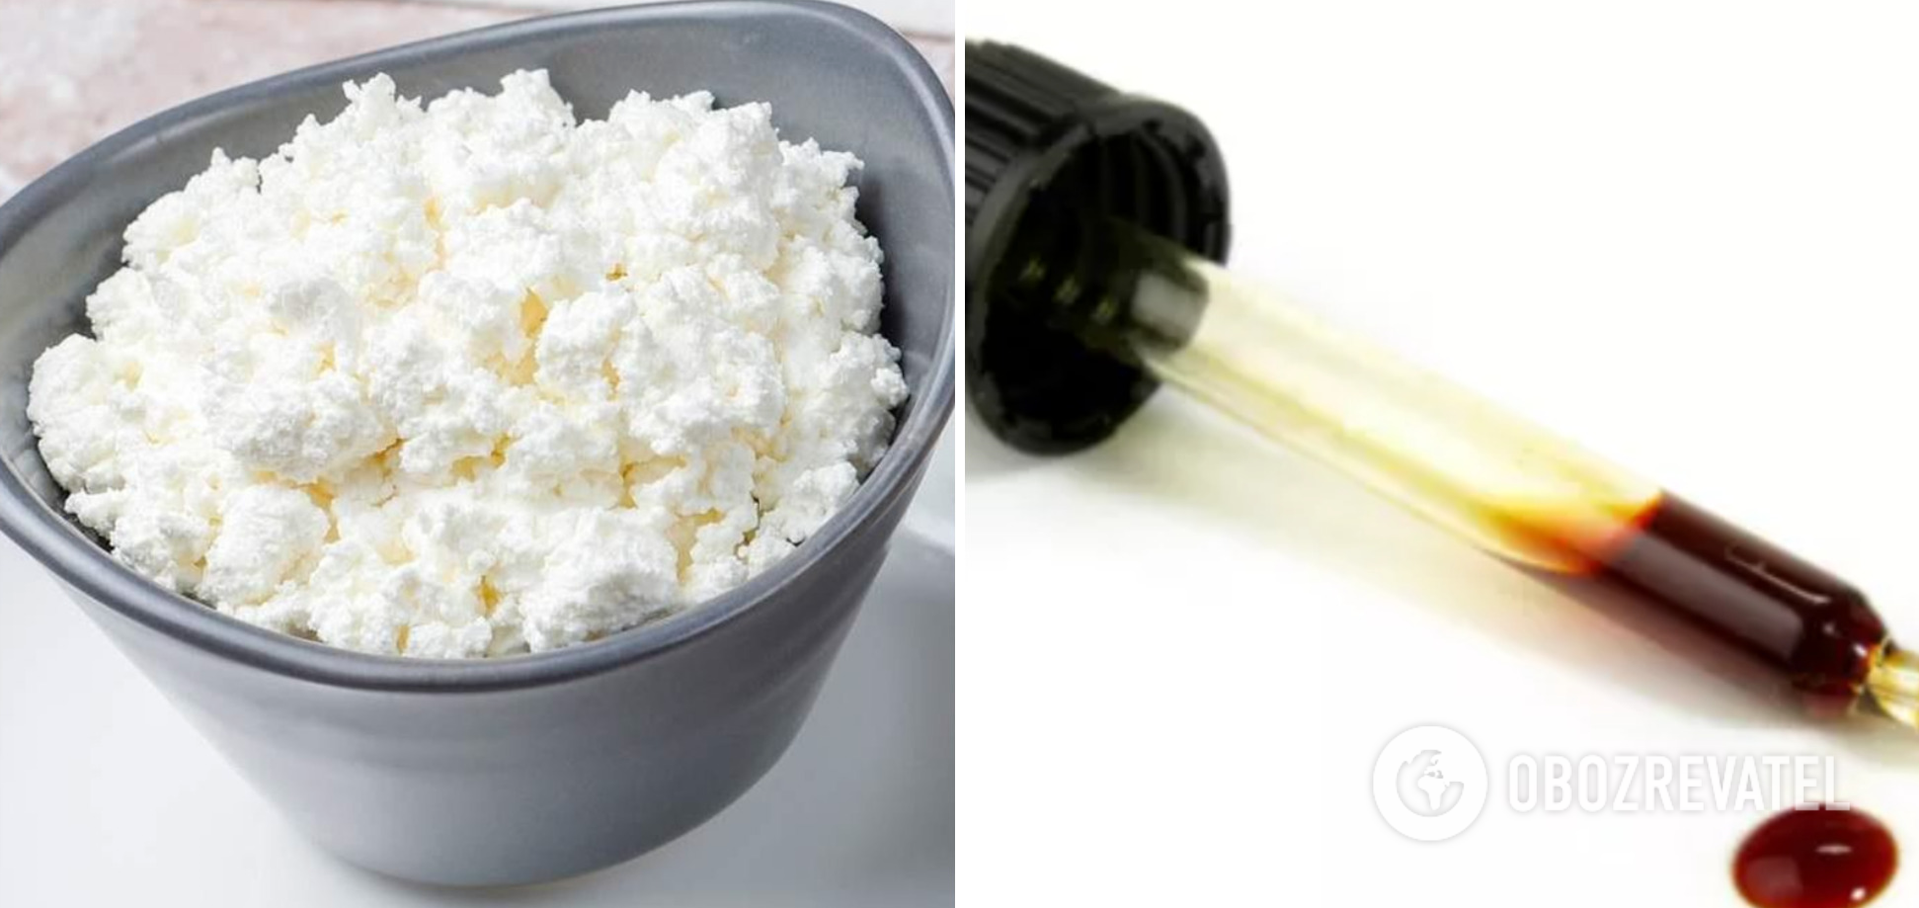 How to test cottage cheese with iodine